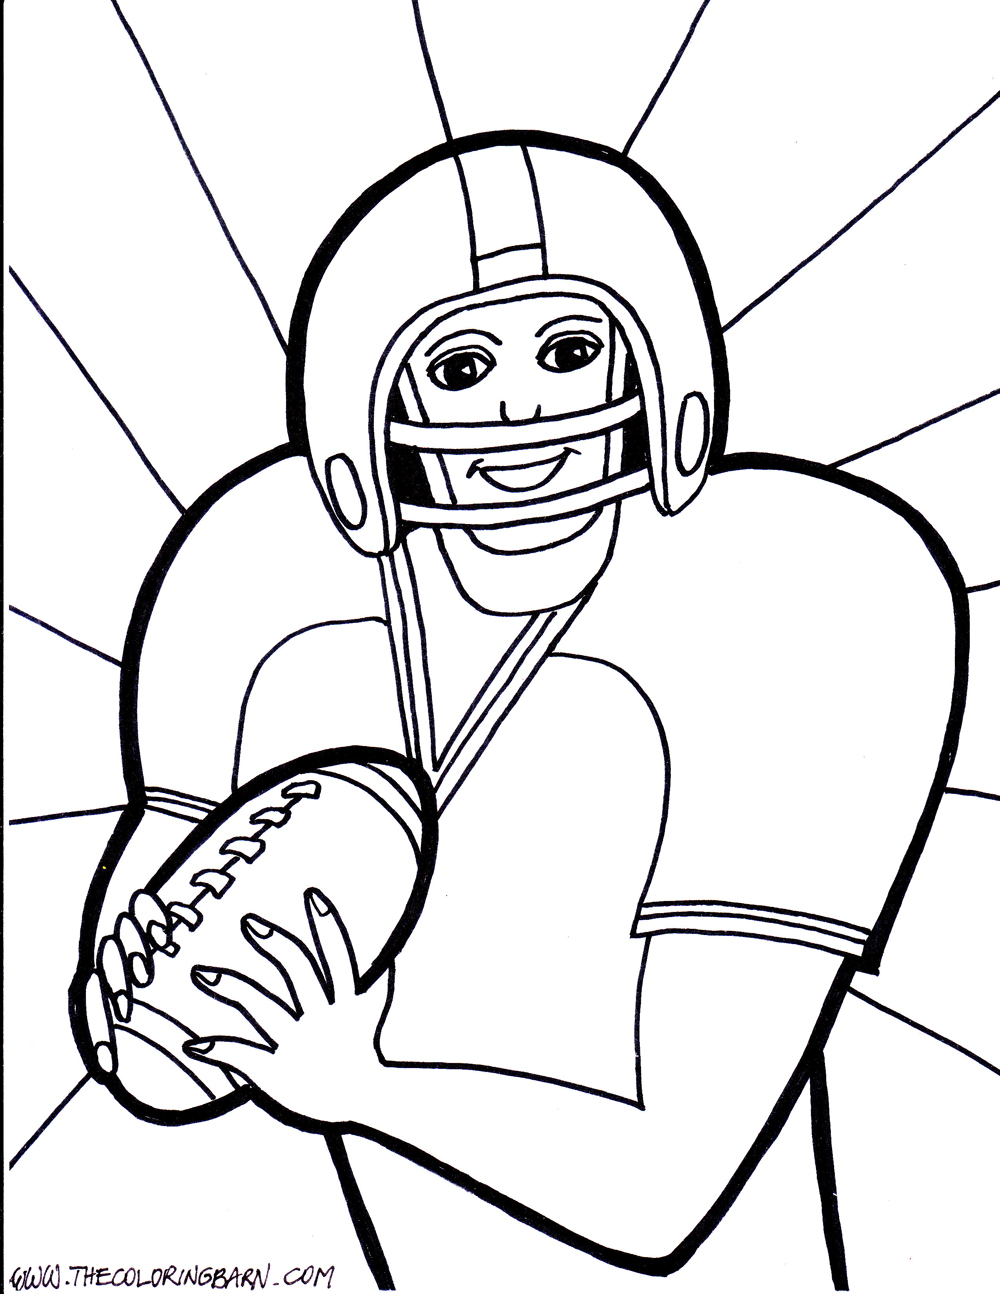 Football Colouring Pages For Kids